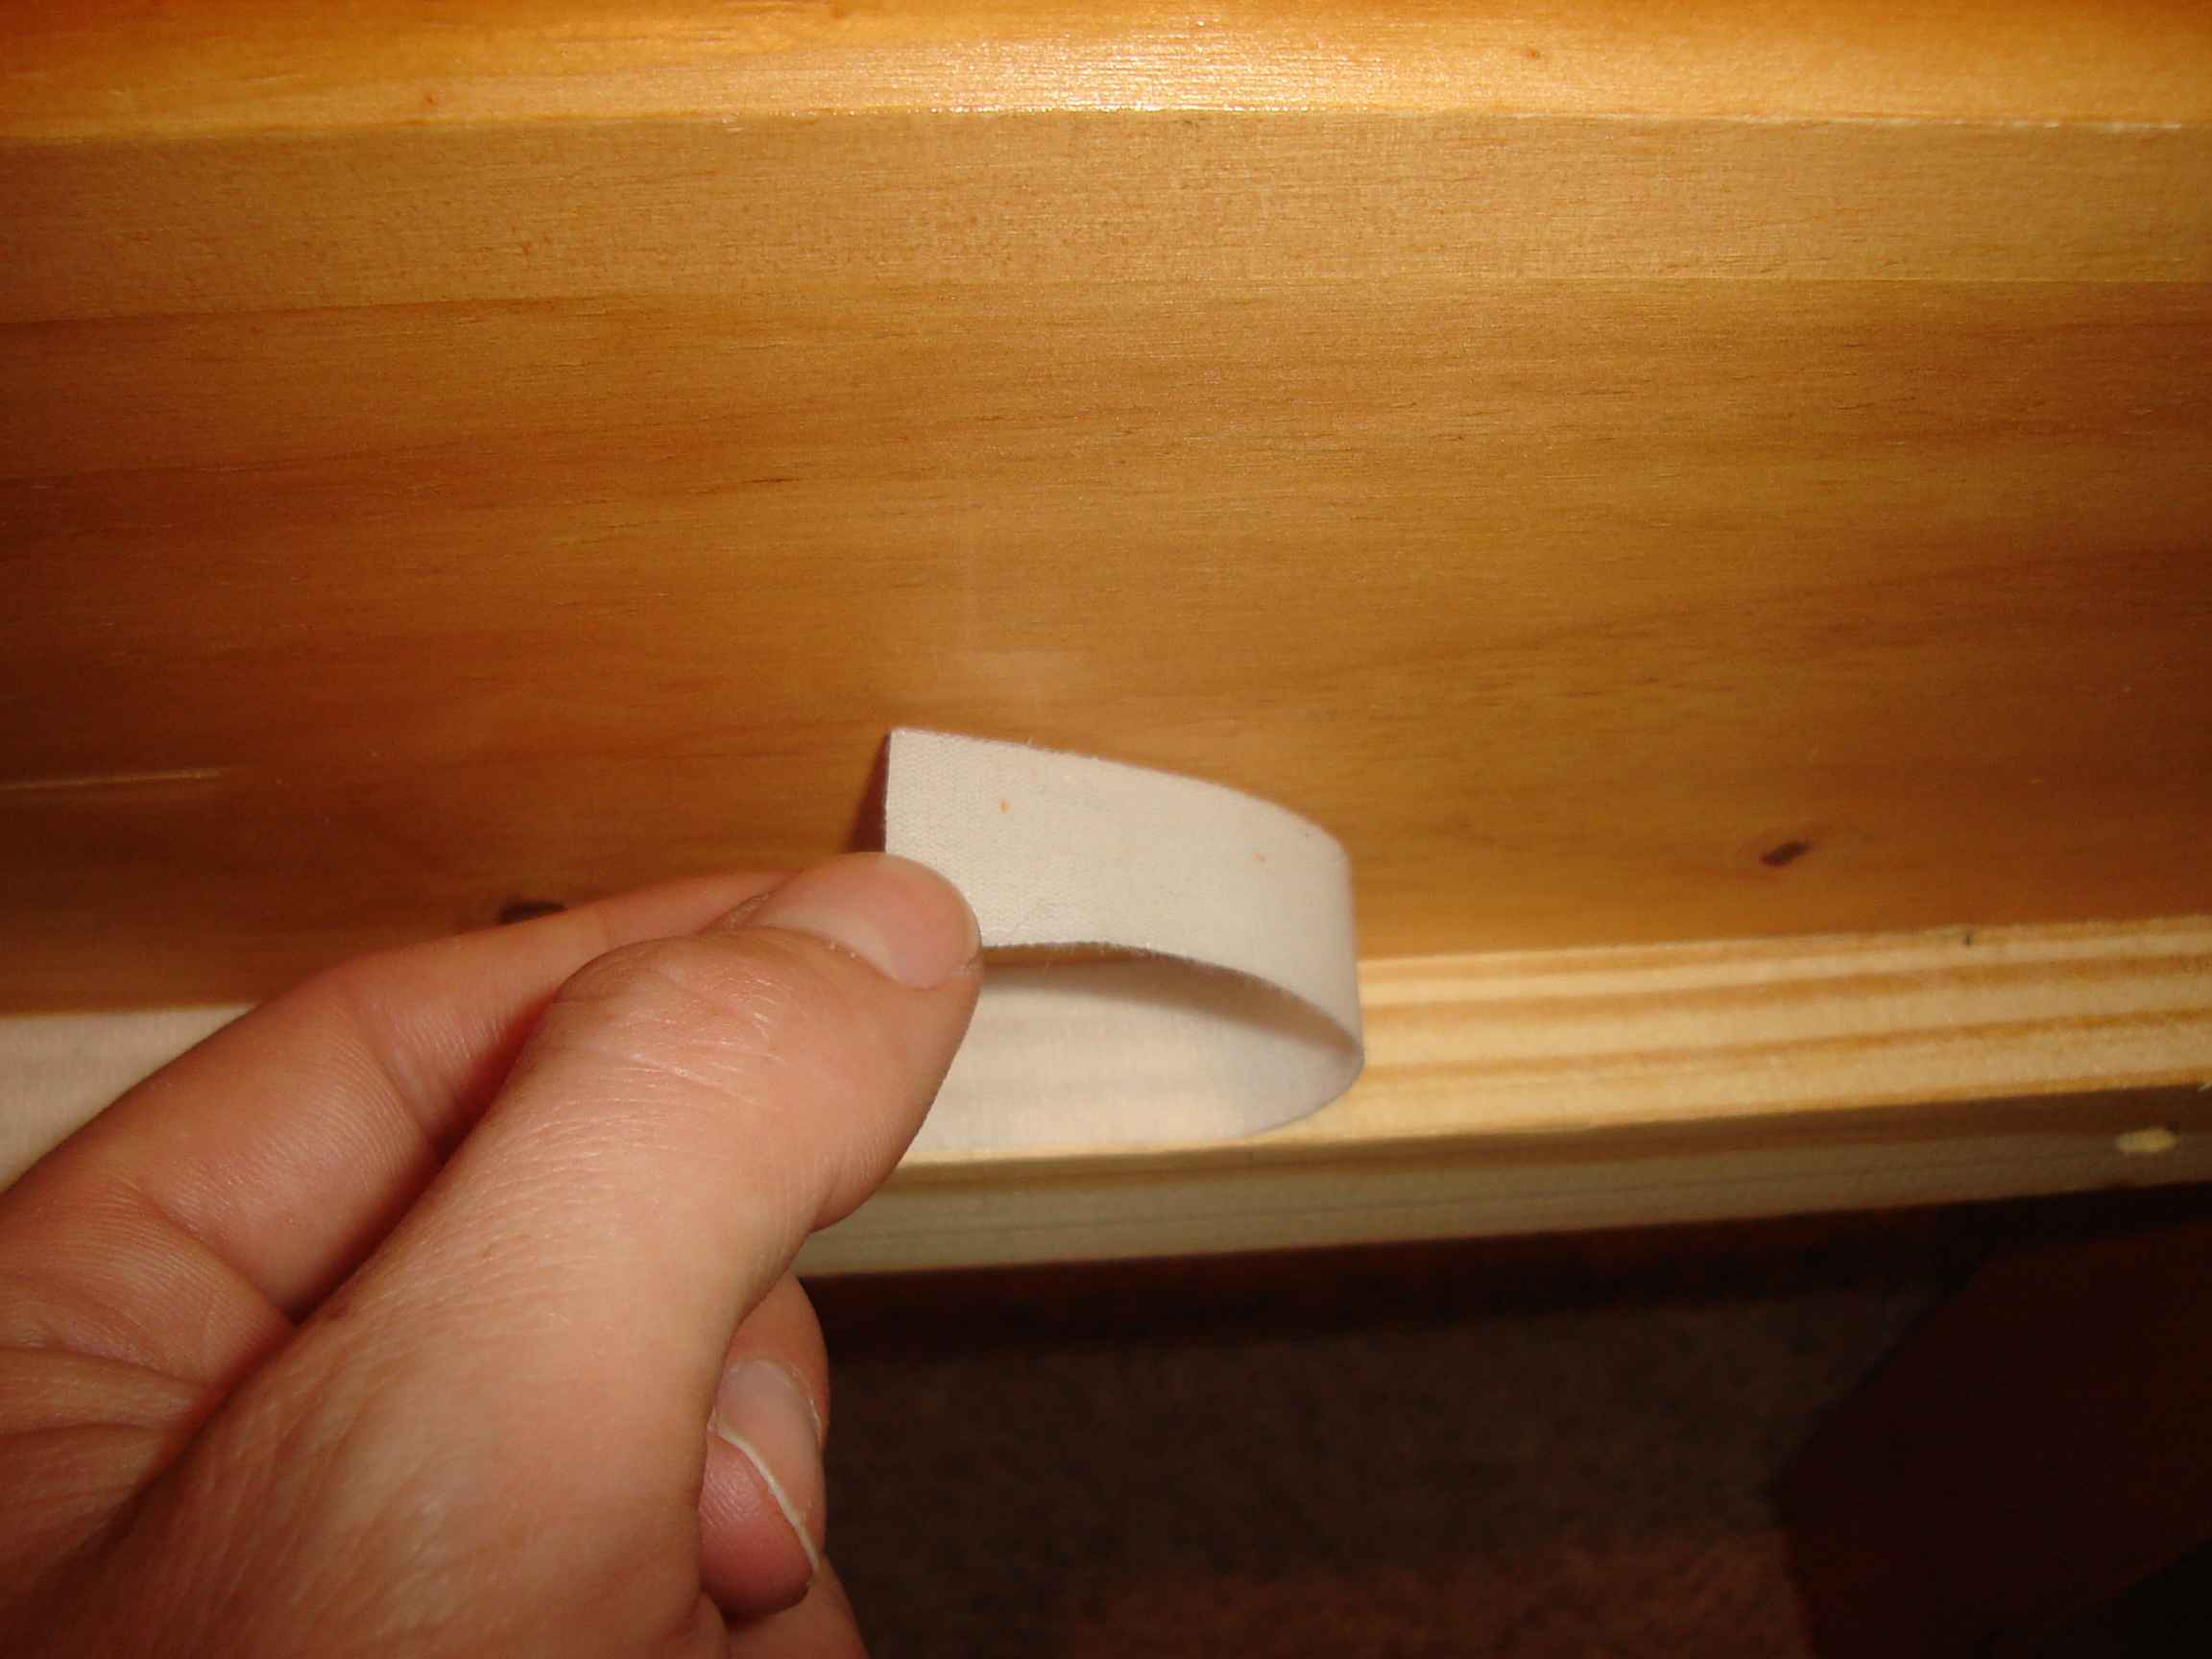 Velcro on the bed rails